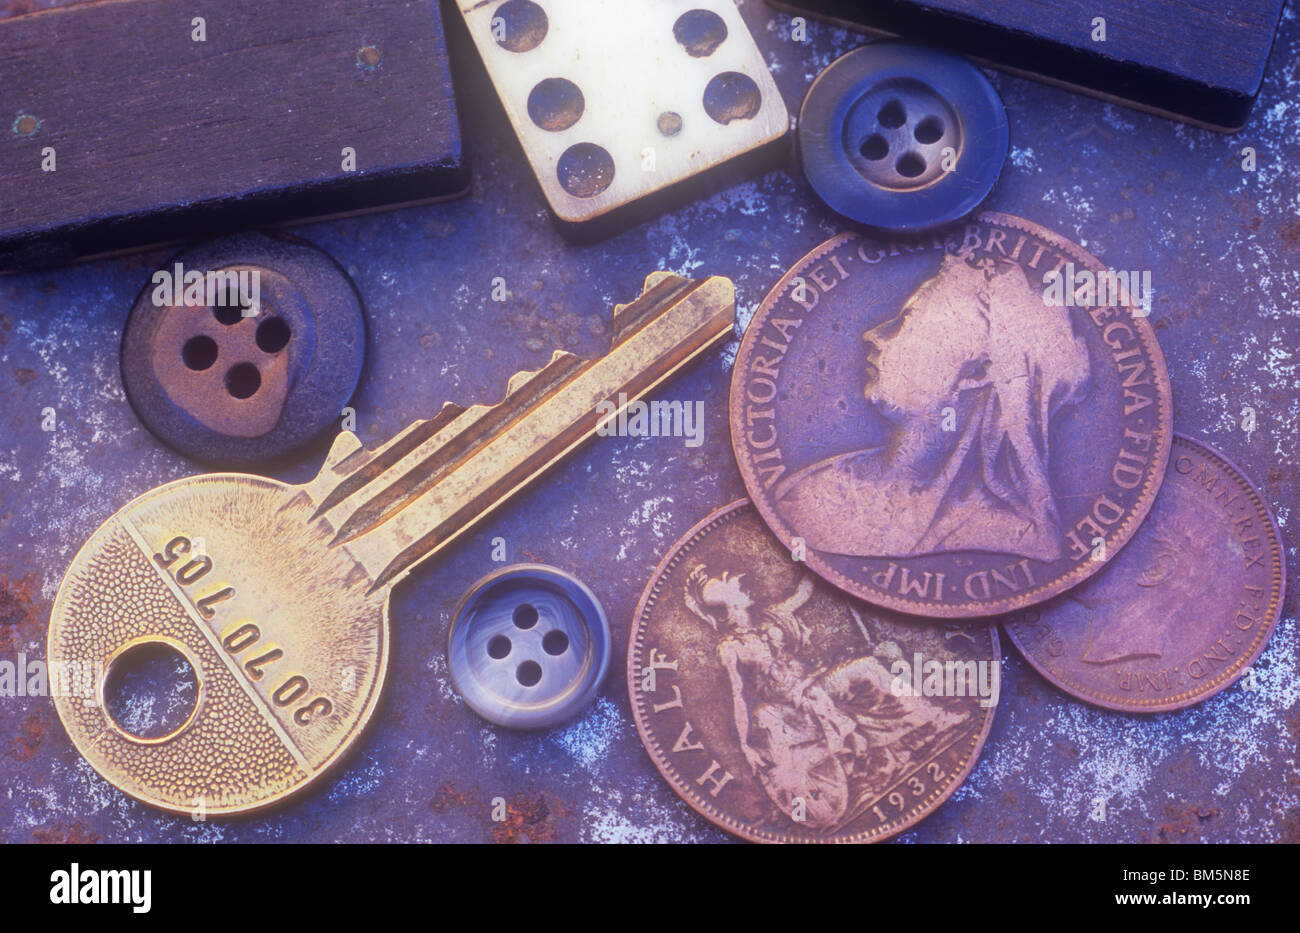 Brass coloured doorkey with domino pieces three male buttons and three old British coins lying on rusting metal tray Stock Photo